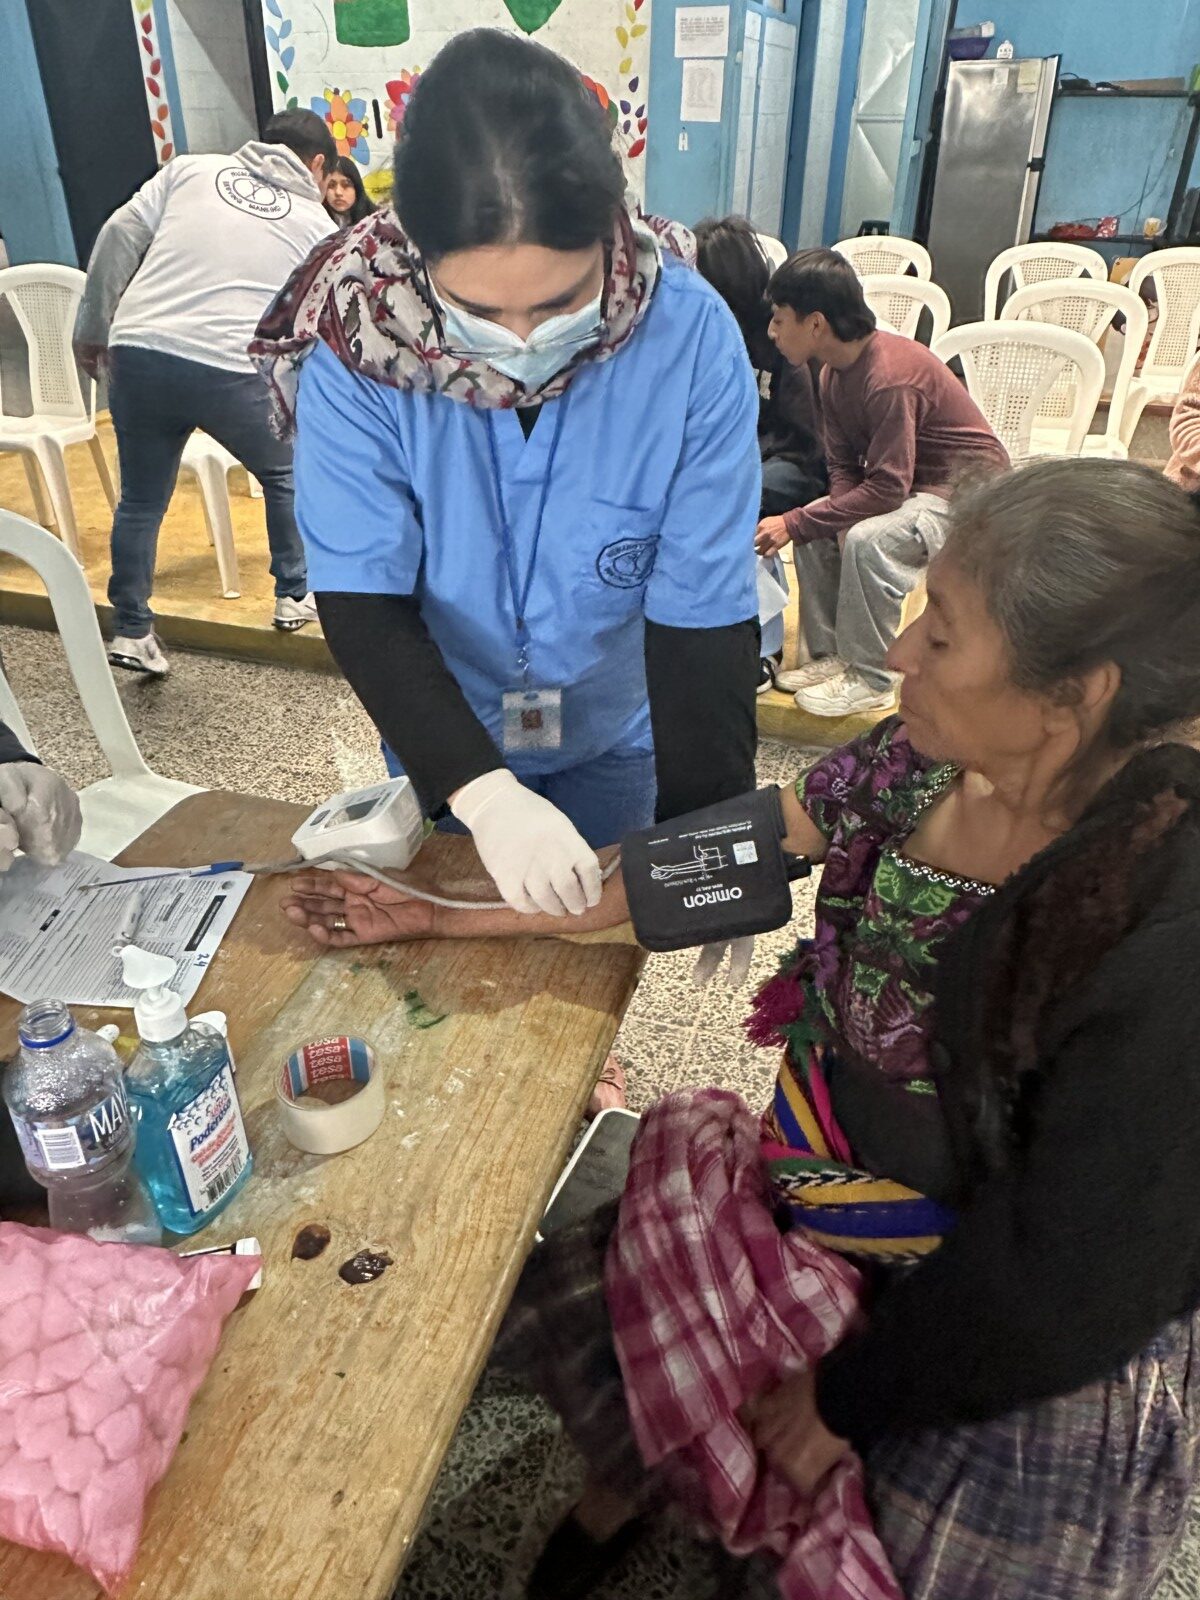 An elderly woman in traditional Guatemalan clothing gets her blood pressure taken by a female in blue Humanity First scrubs